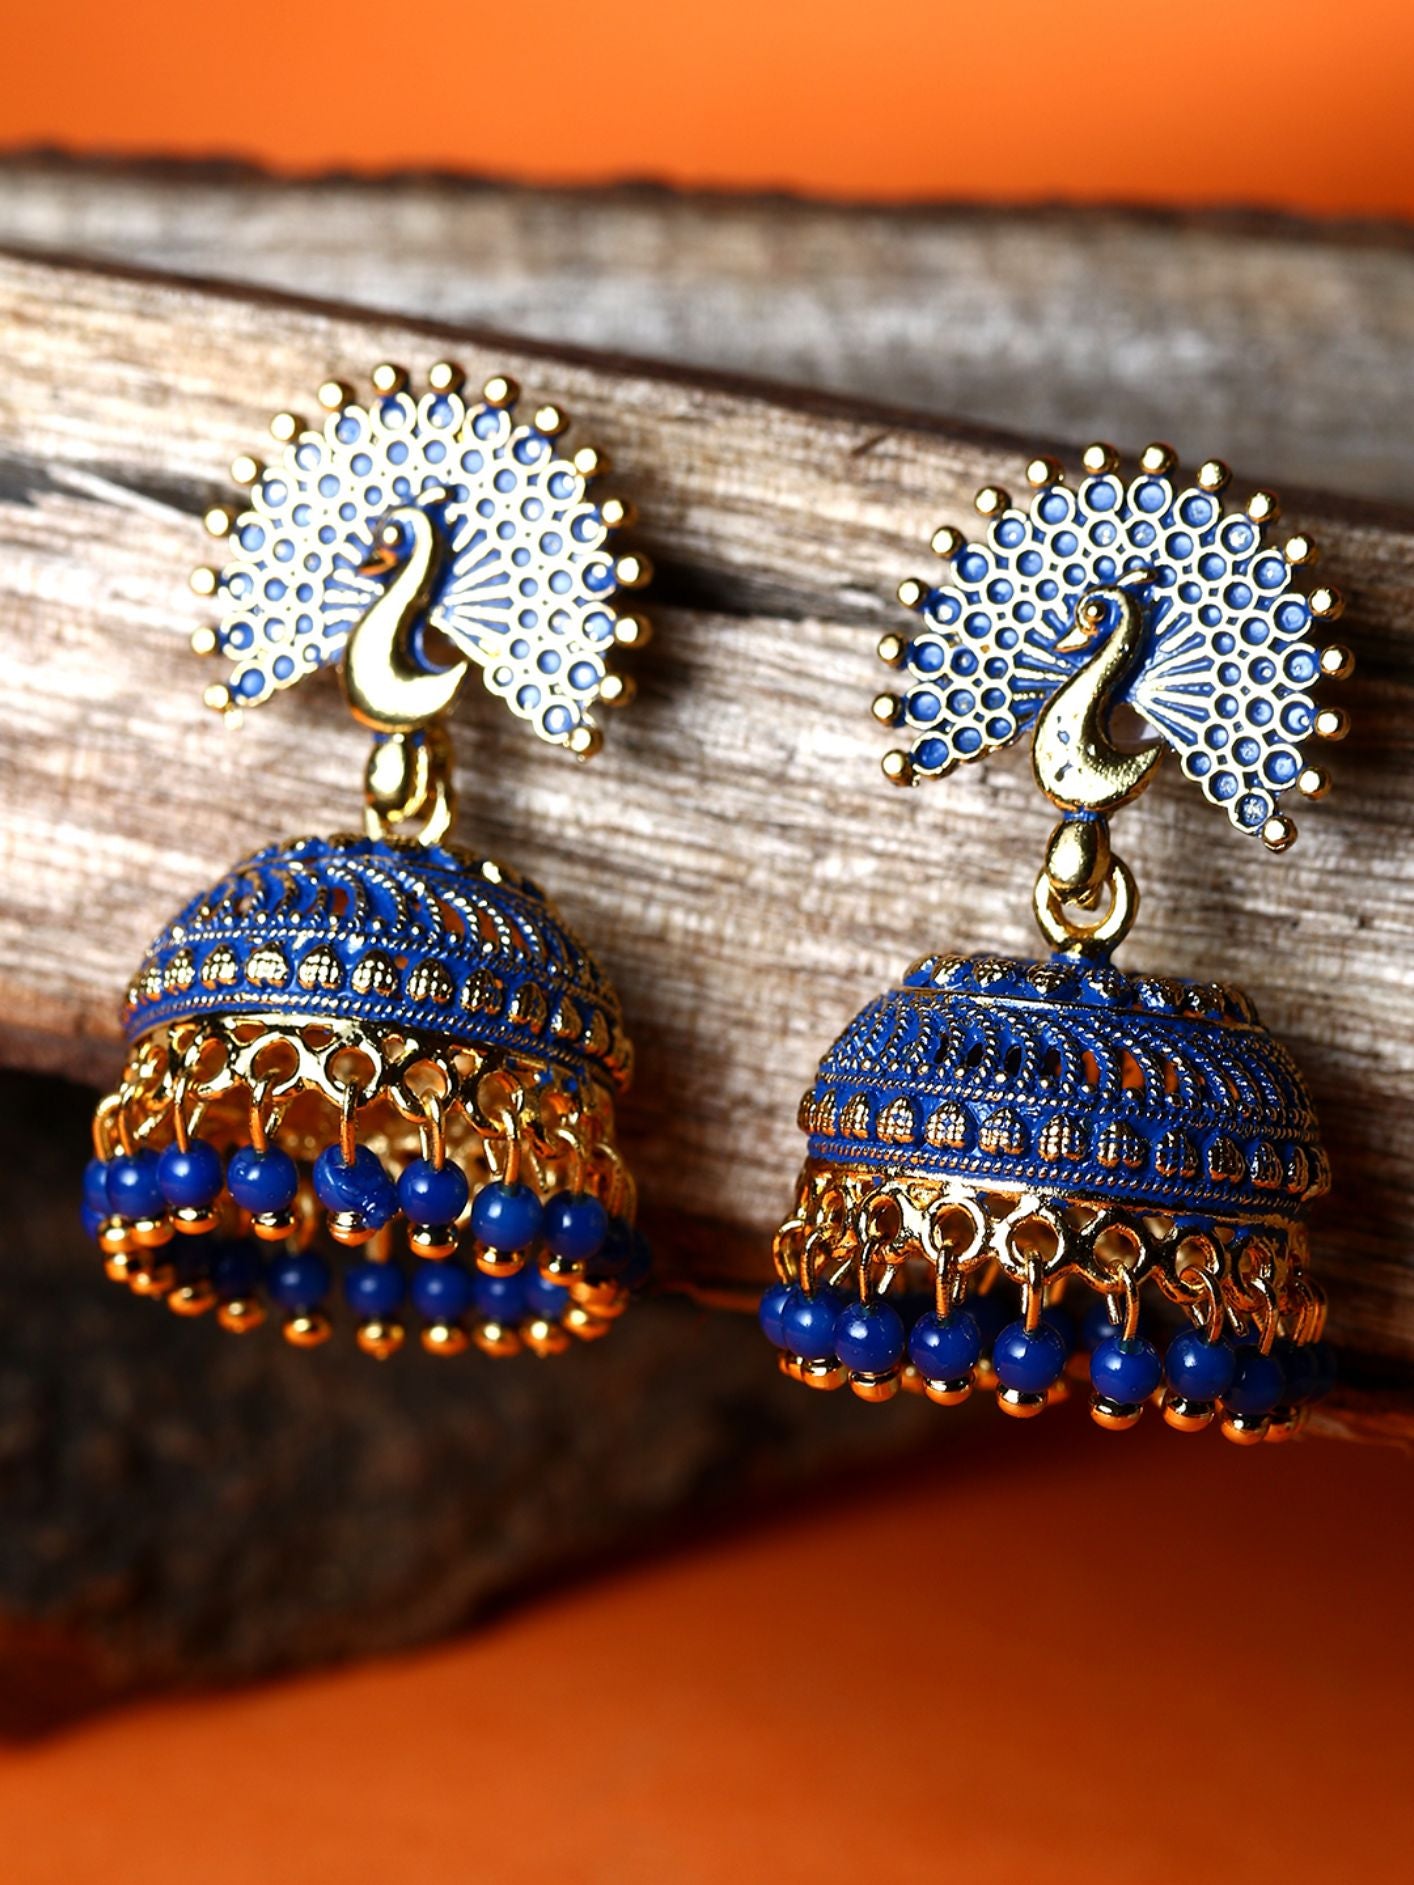 Women's Blue & Gold-Plated Enamelled Dome Shaped Jhumkas - Anikas Creation